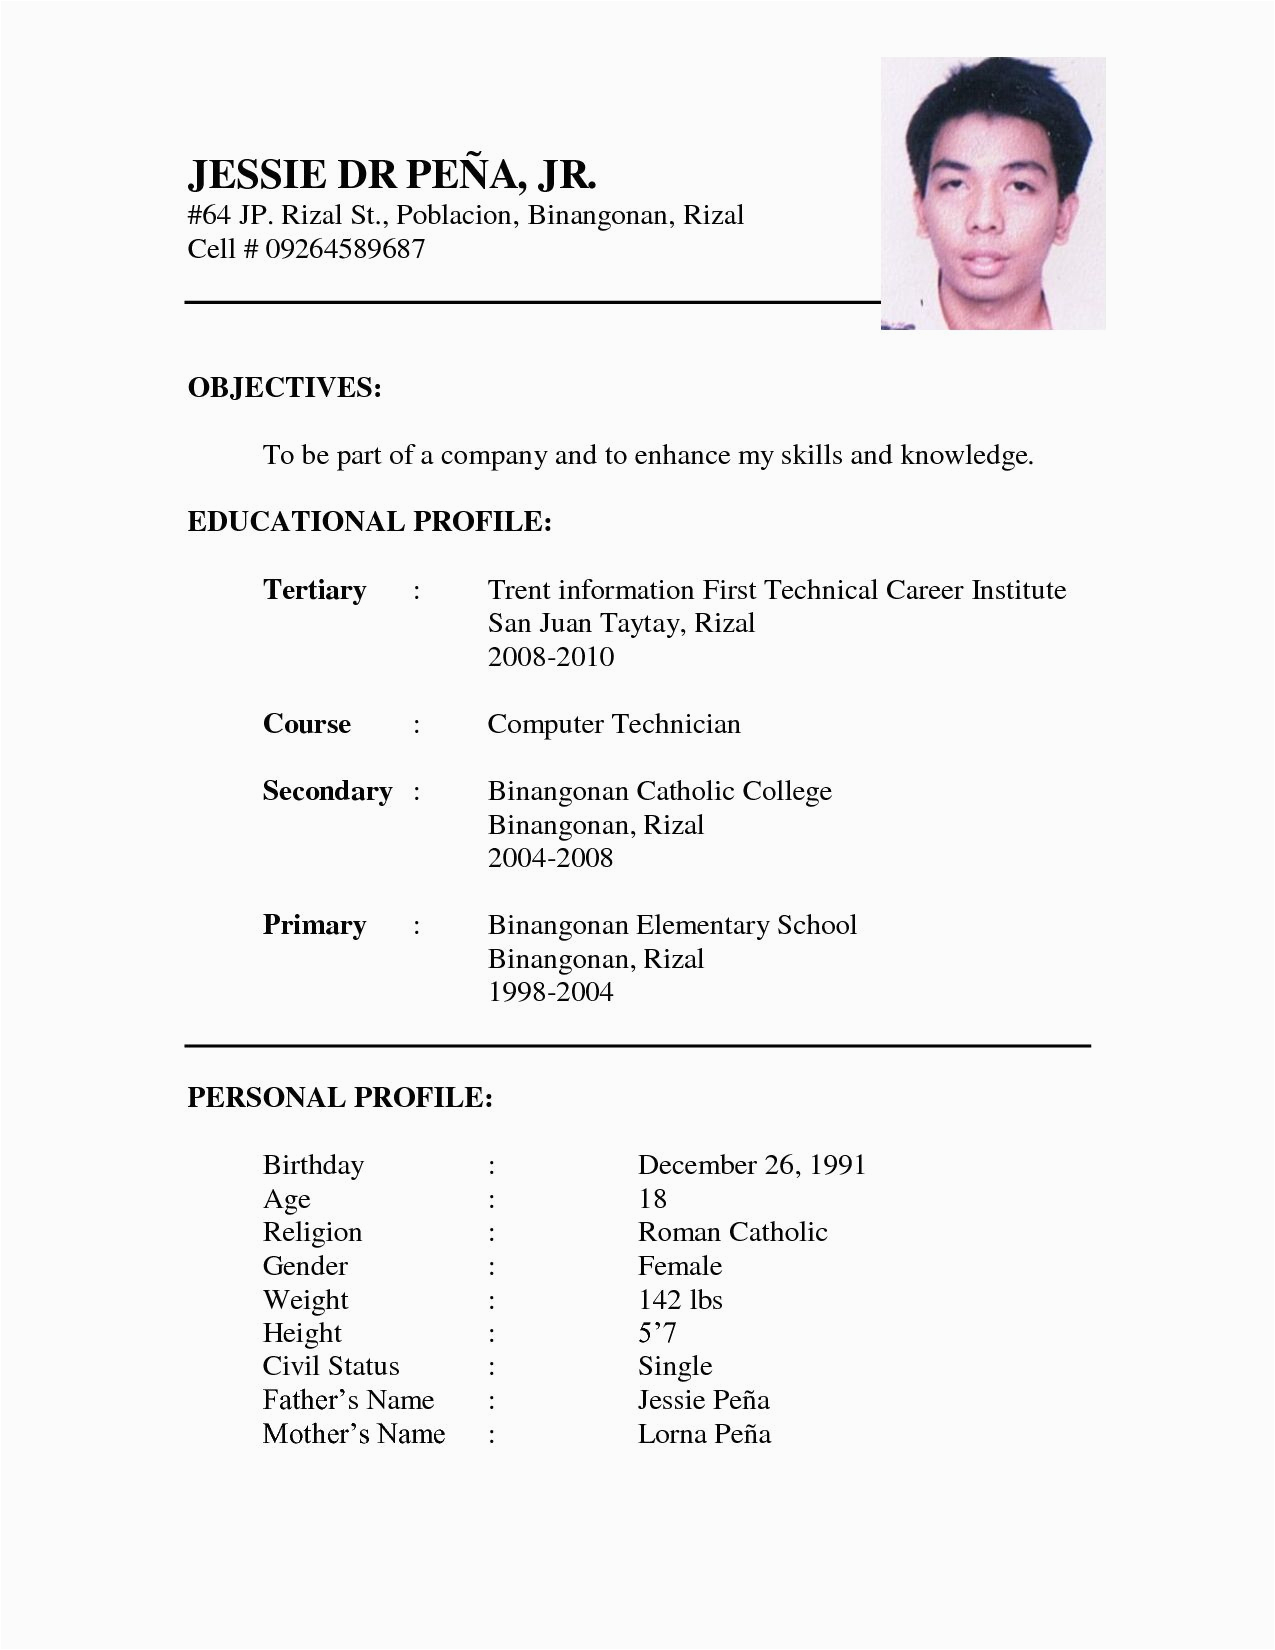 Resume Samples Example Of Resume to Apply Job the Most Example A Resume format Example A Resume format Resume